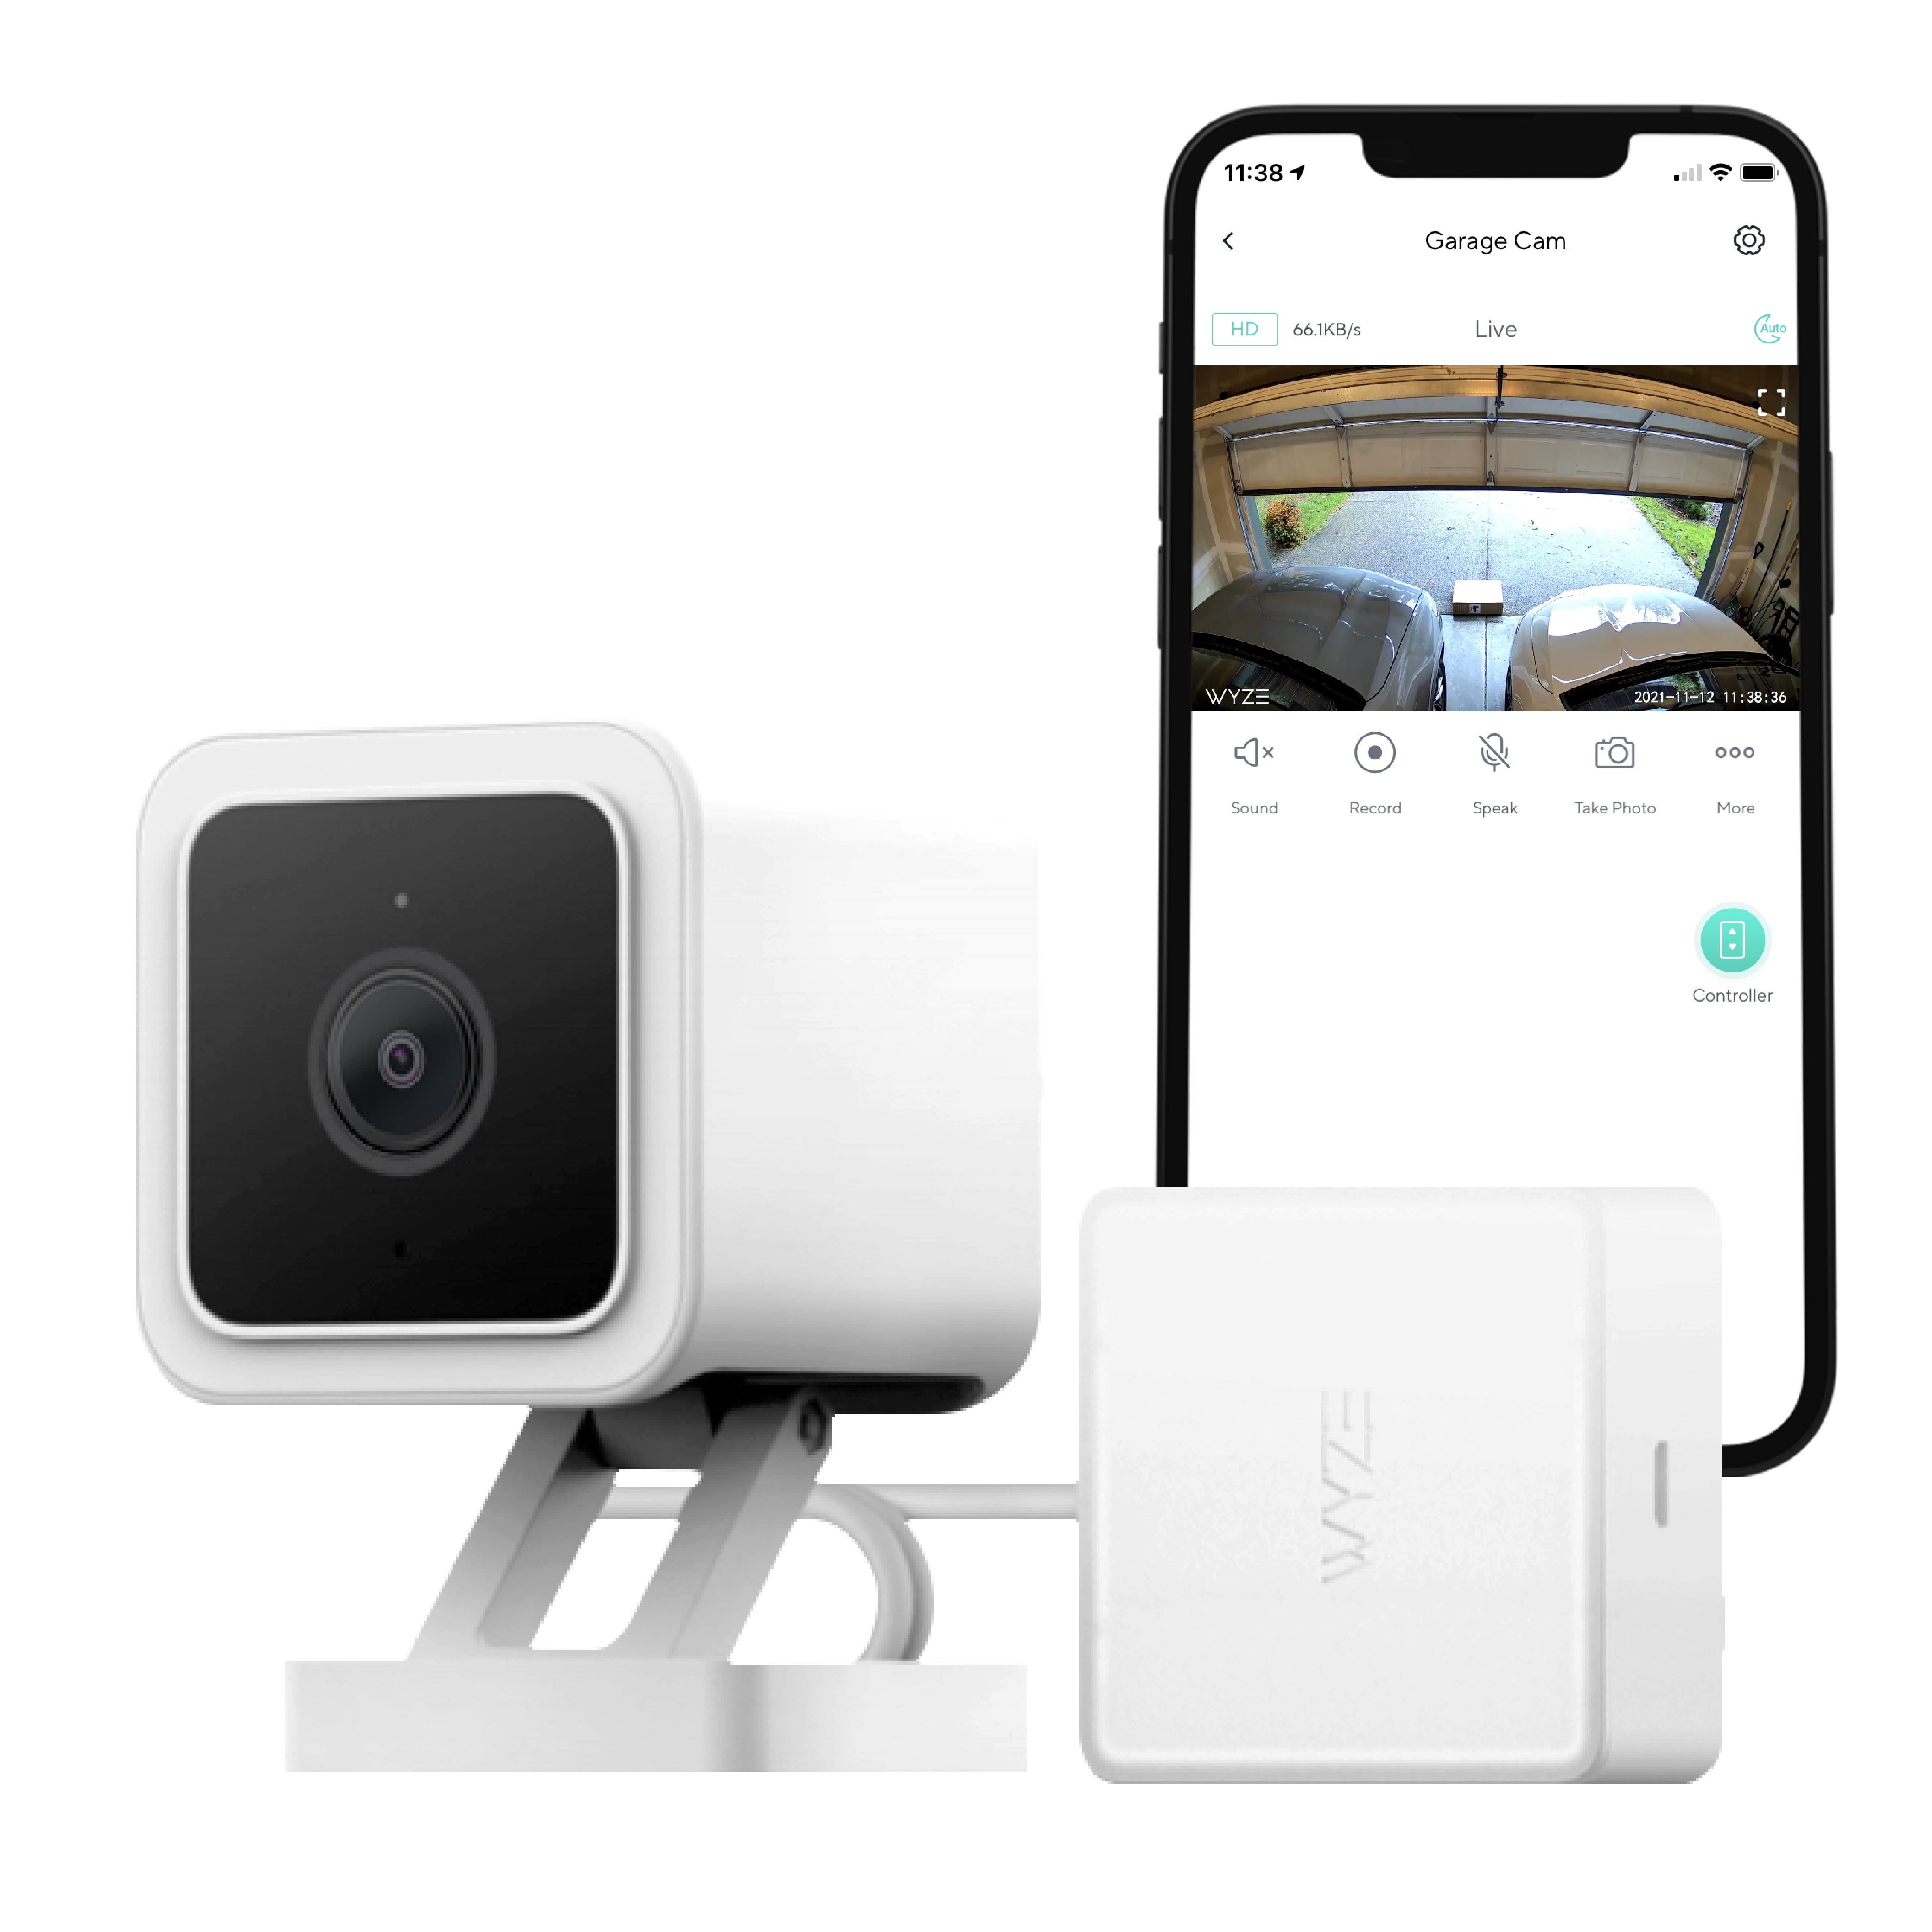 Wyze Smart Garage Door Opener, Remotely View and Control with 1080p HD Video Security Camera with Color Night Vision and Two-Way Audio